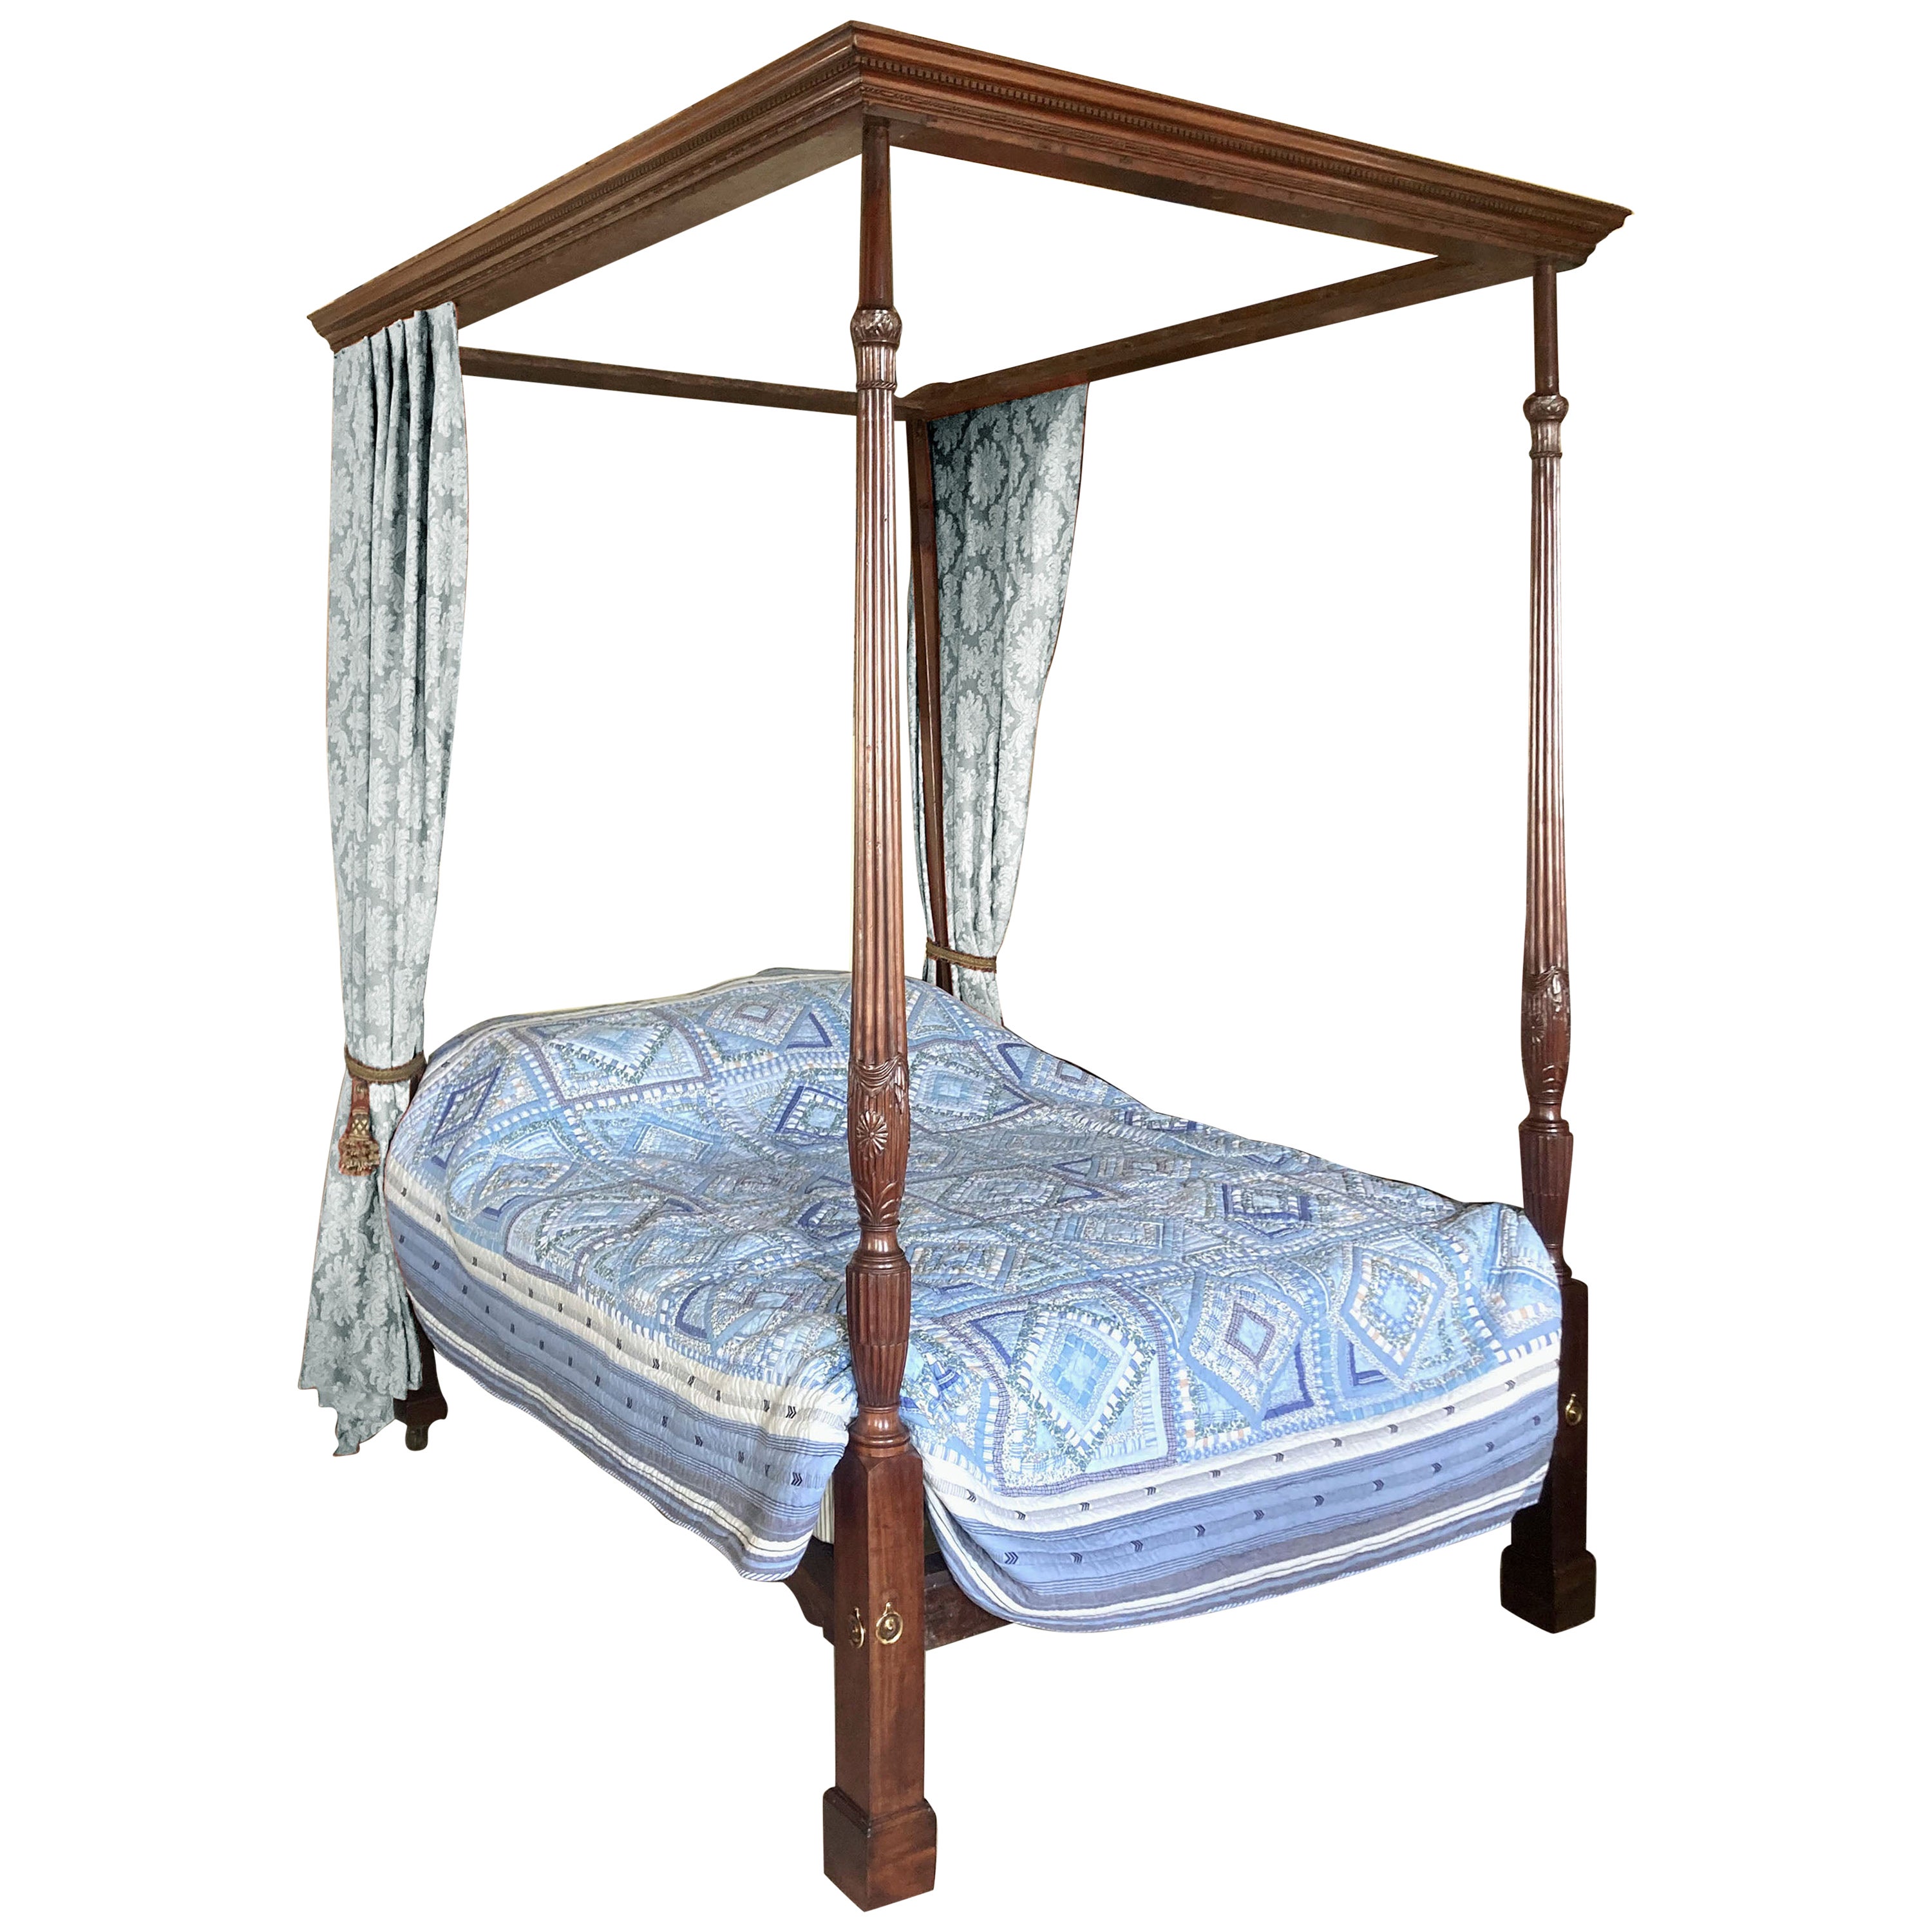 George III mahogany four-poster bed